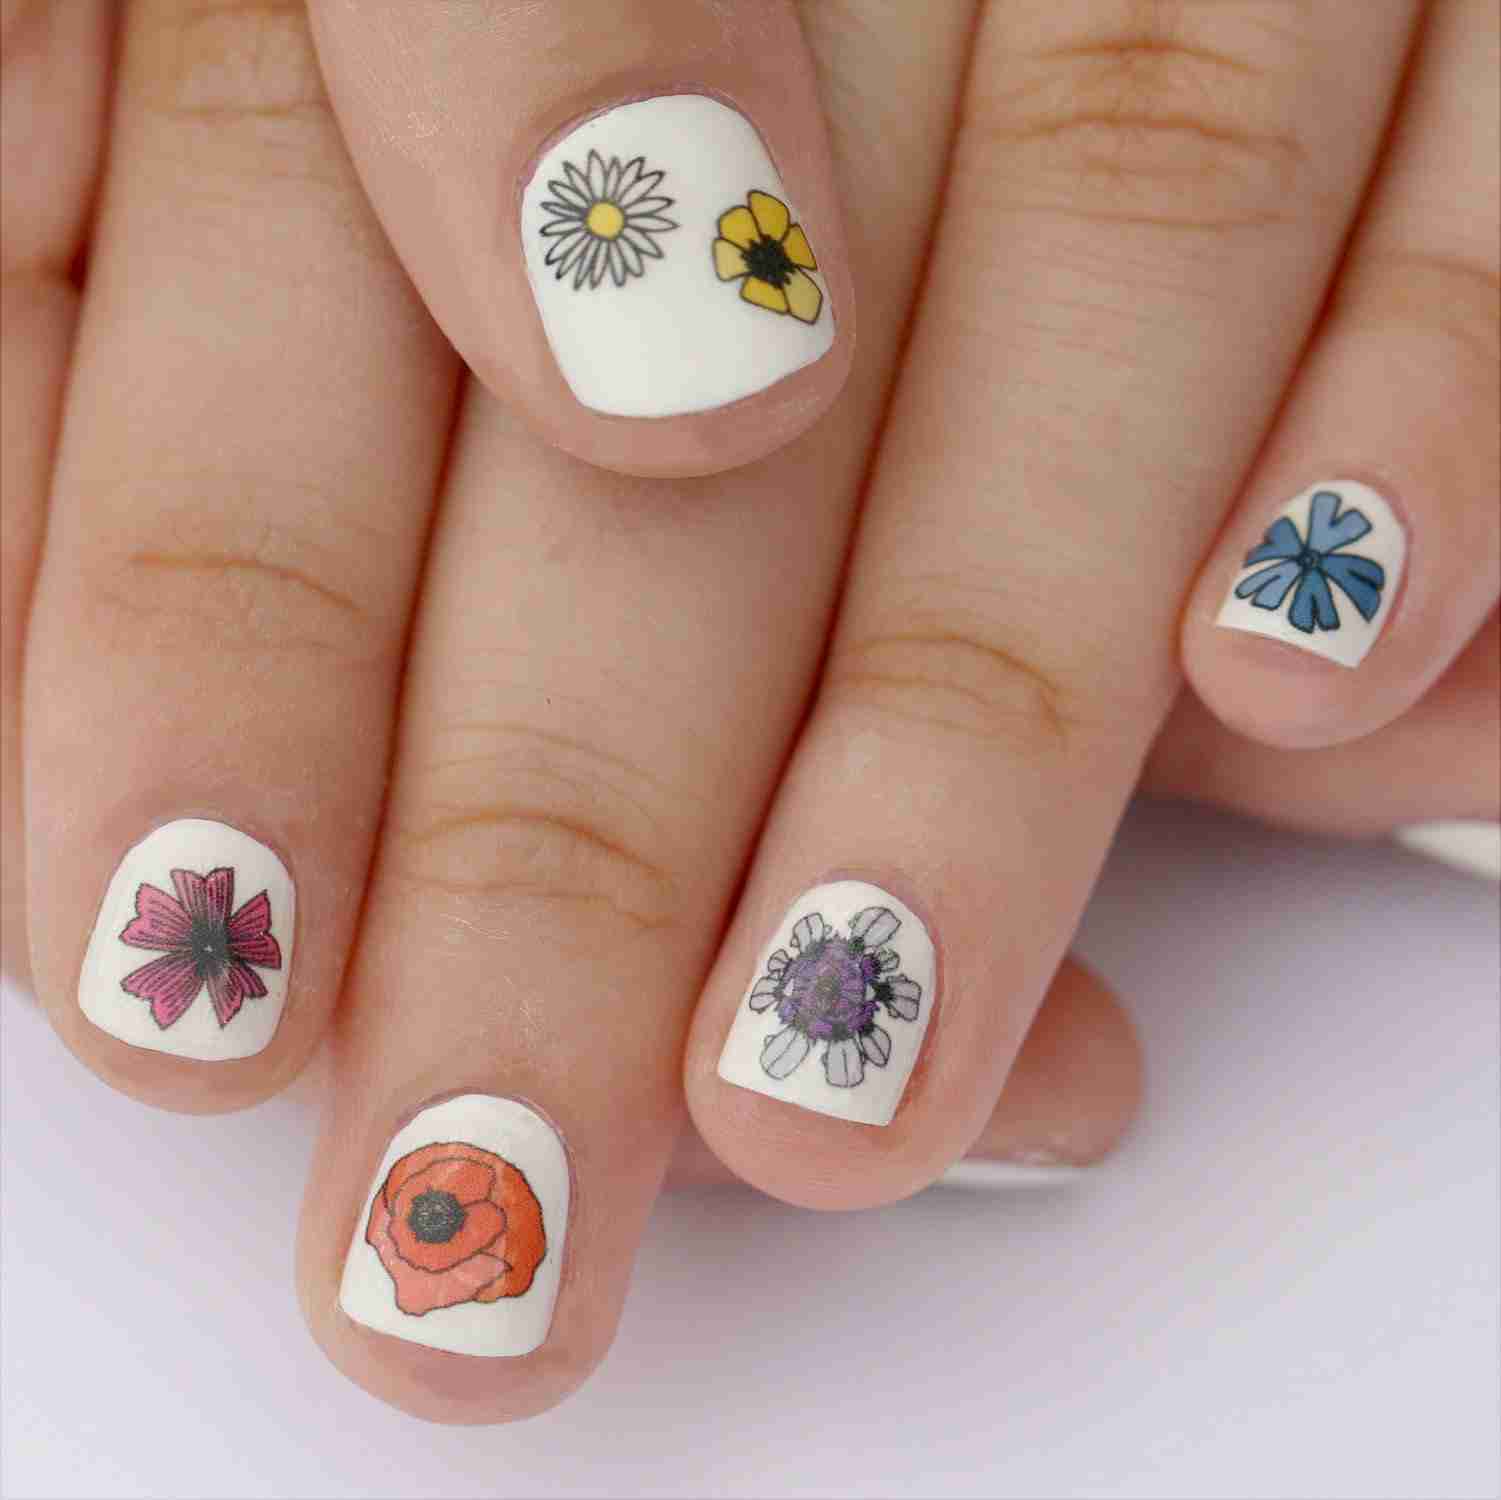 Hottest Trends In DIY Nail Art Decal Transfers - Seeing Dandy Blog